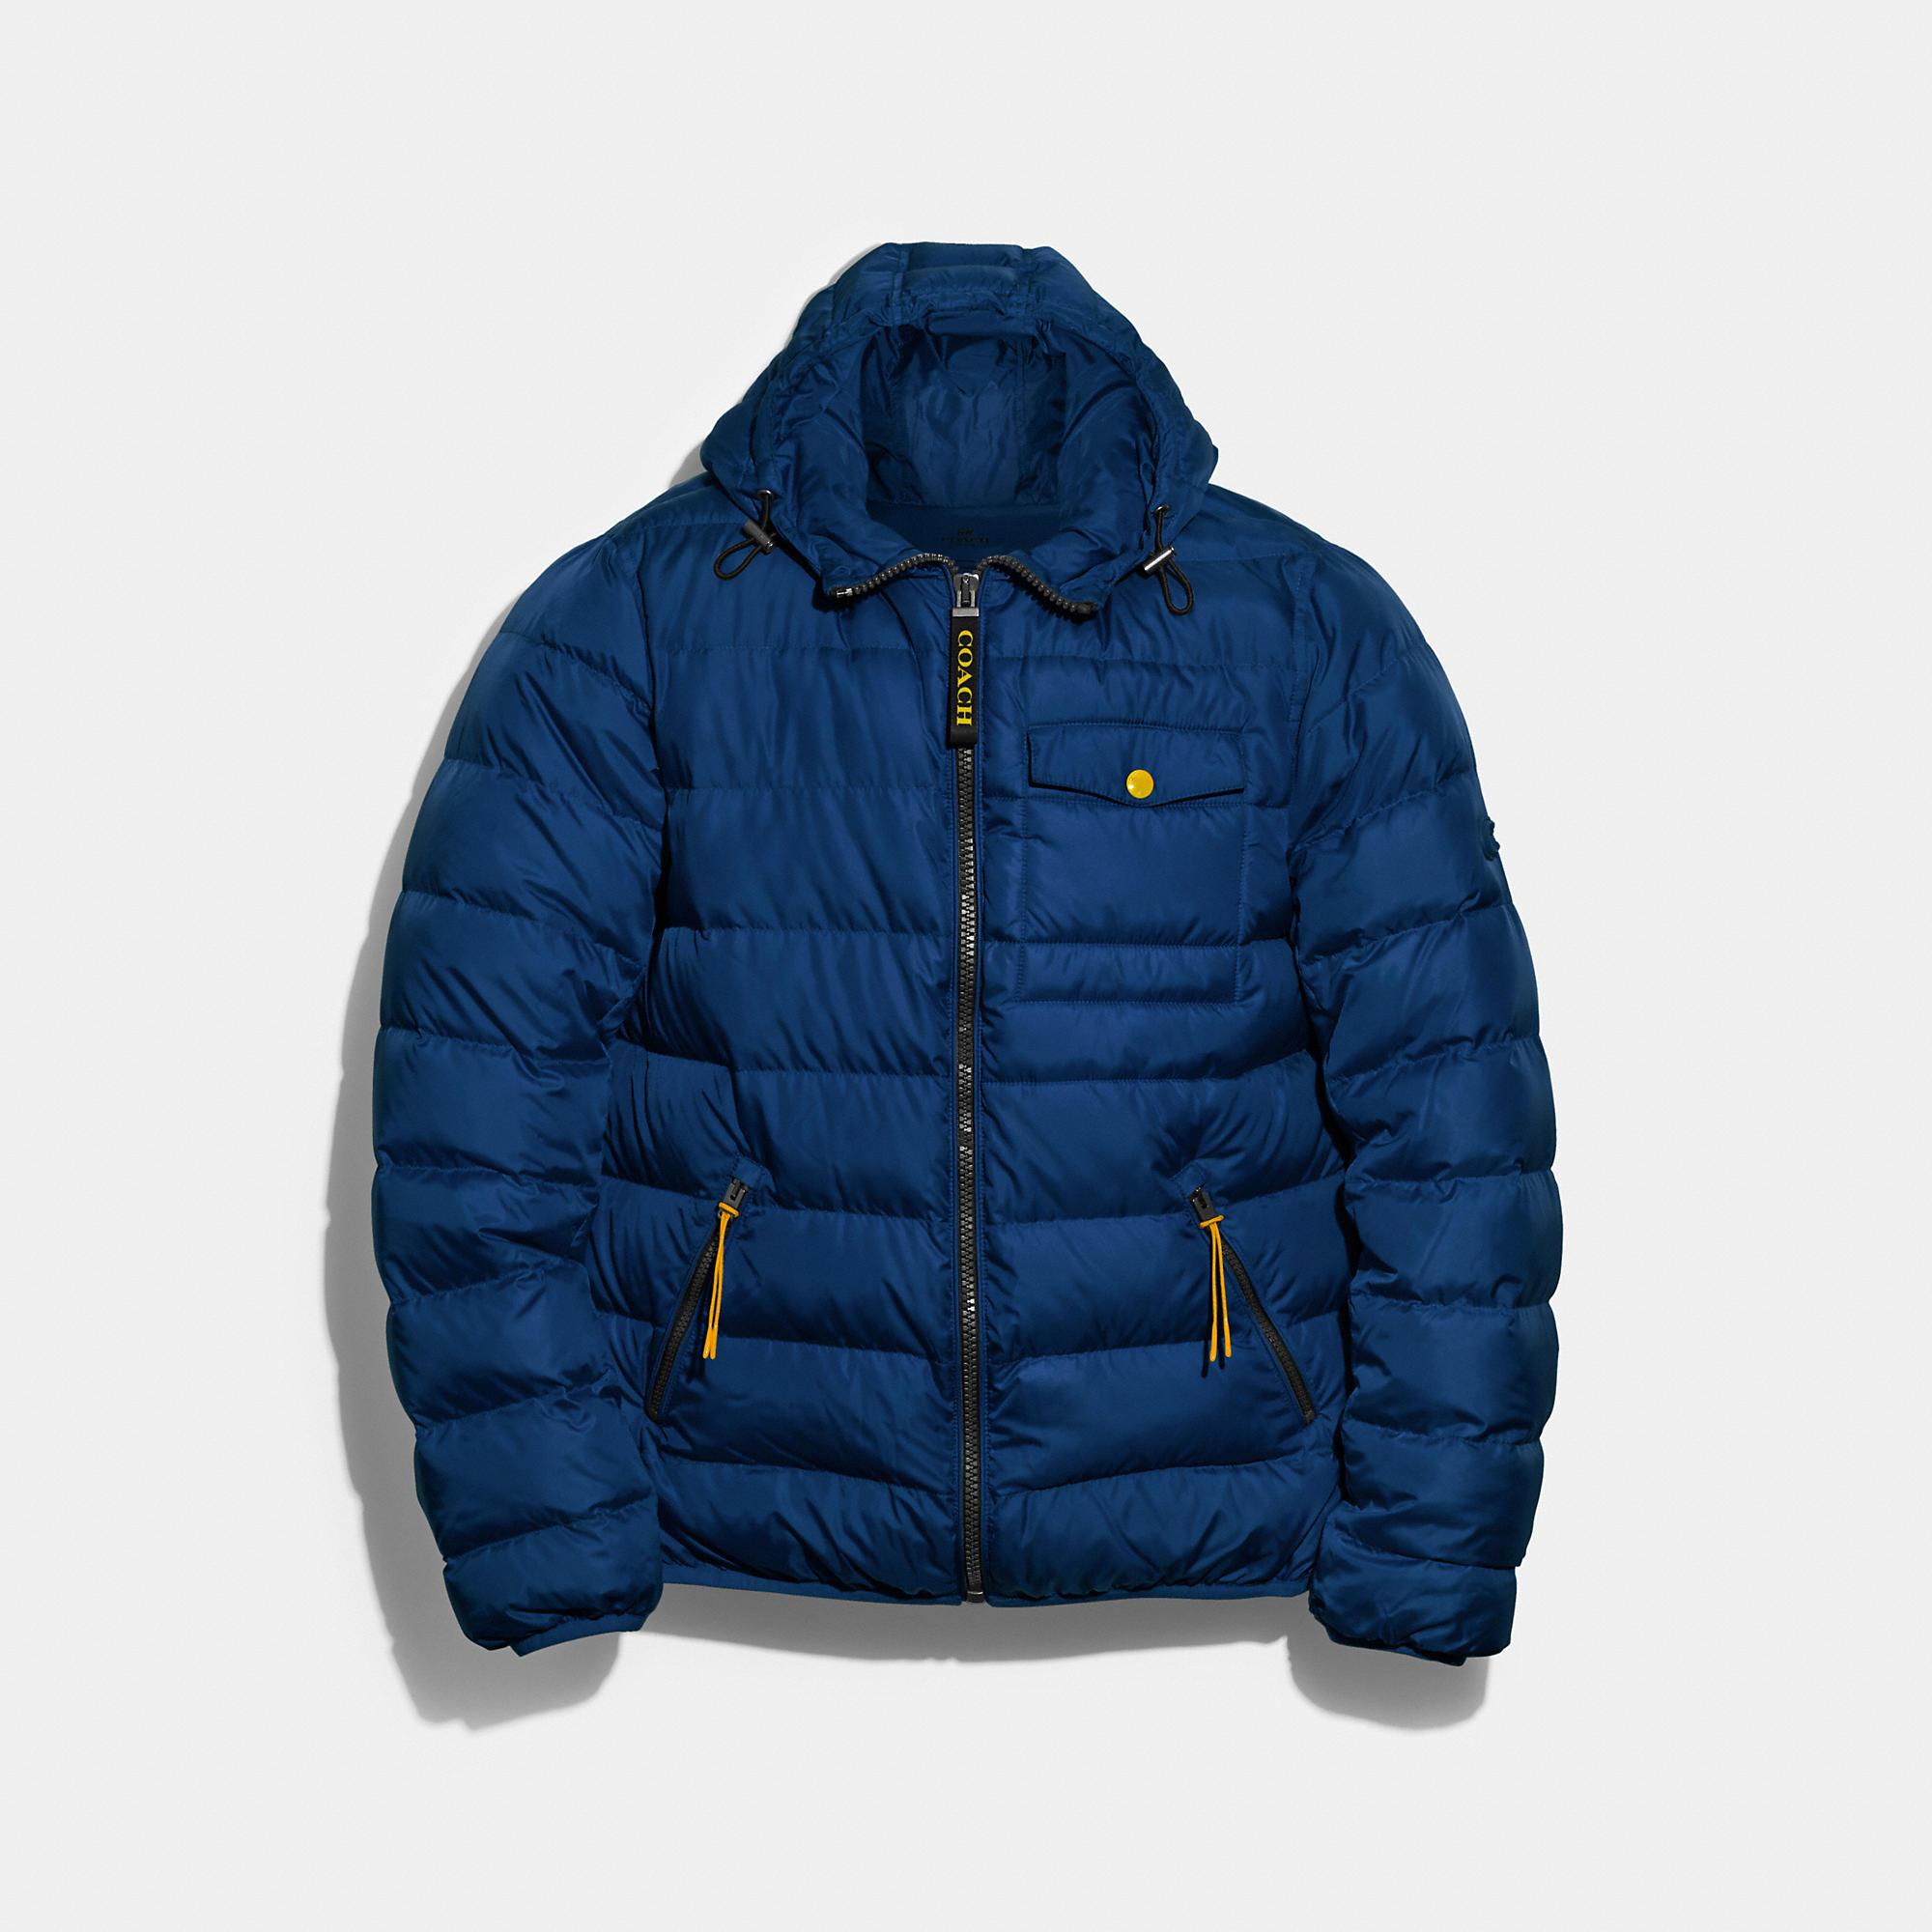 COACH Synthetic Lightweight Down Jacket in Blue for Men - Lyst